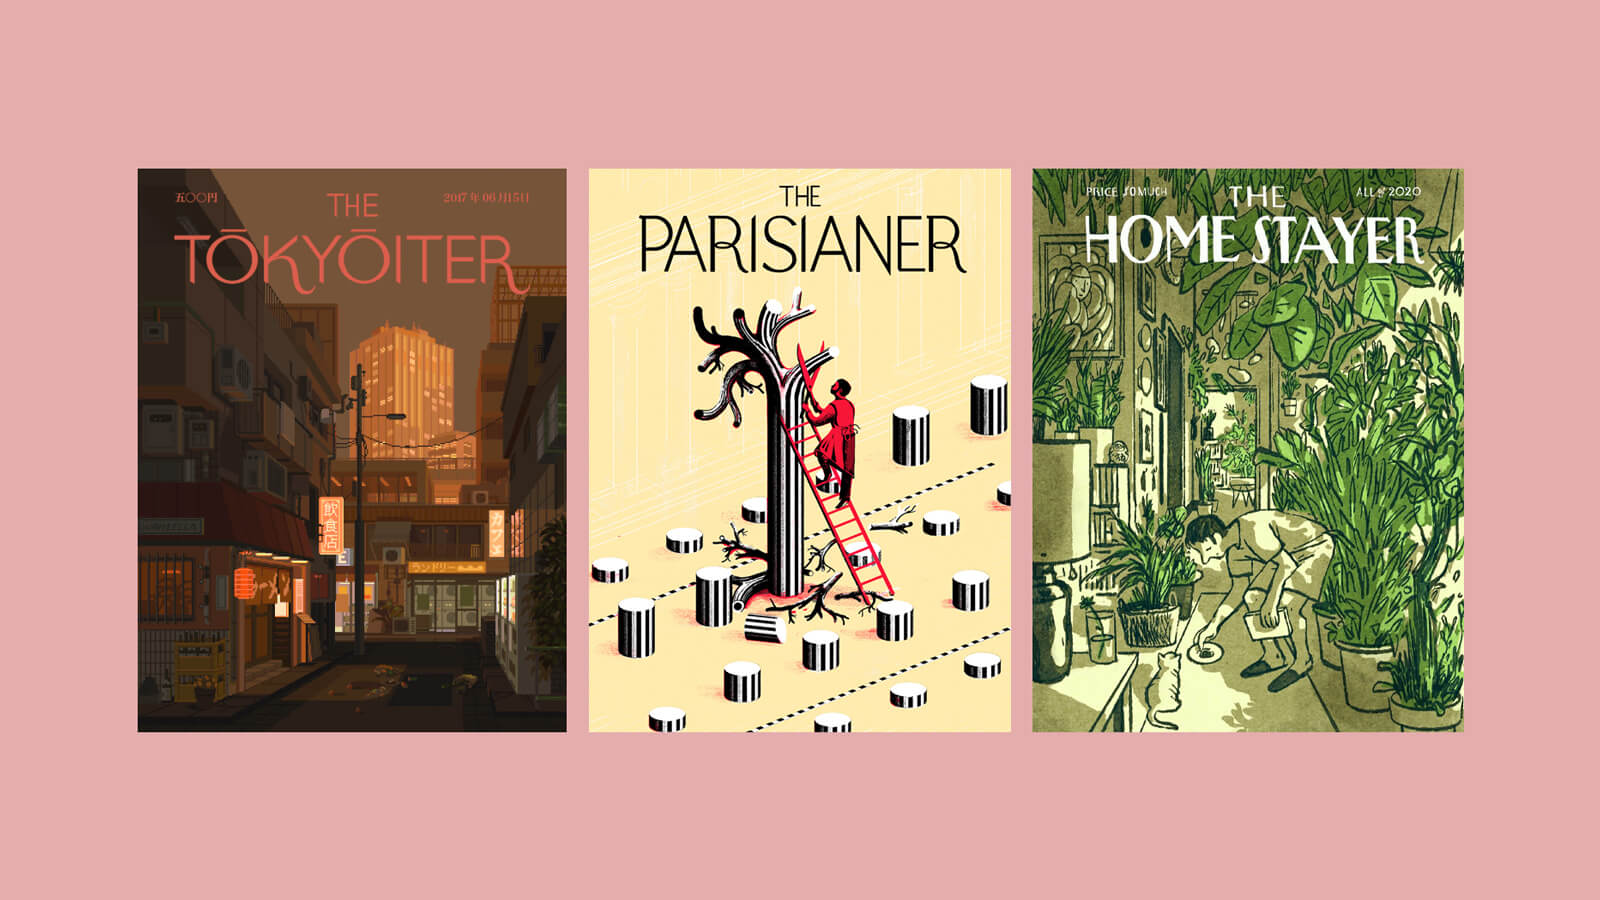 Three illustrated New Yorker-homage covers: 1. a dusky street view of Tokyo; 2. A red figure cutting down a tree; 3. a figure feeding a cat in a house stuffed full of plants.